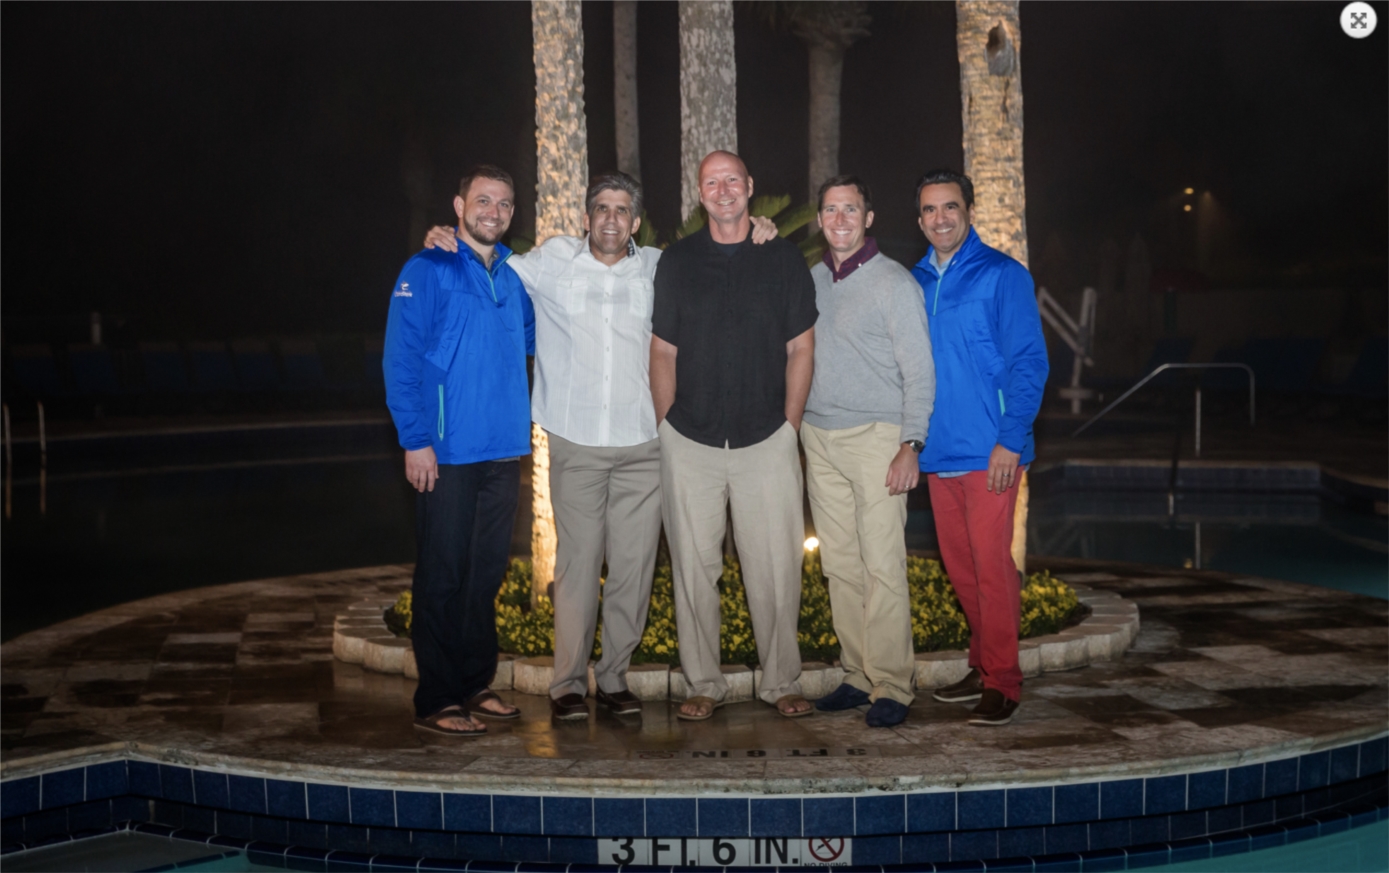 Many sales organizations send their sales reps on a "club trip" each year if they make their numbers. At ClearShark, EVERY employee goes on the club trip if we have a good year-not just sales. This really contributes to the team atmosphere that we all enjoy! Thanks to our great management team! 